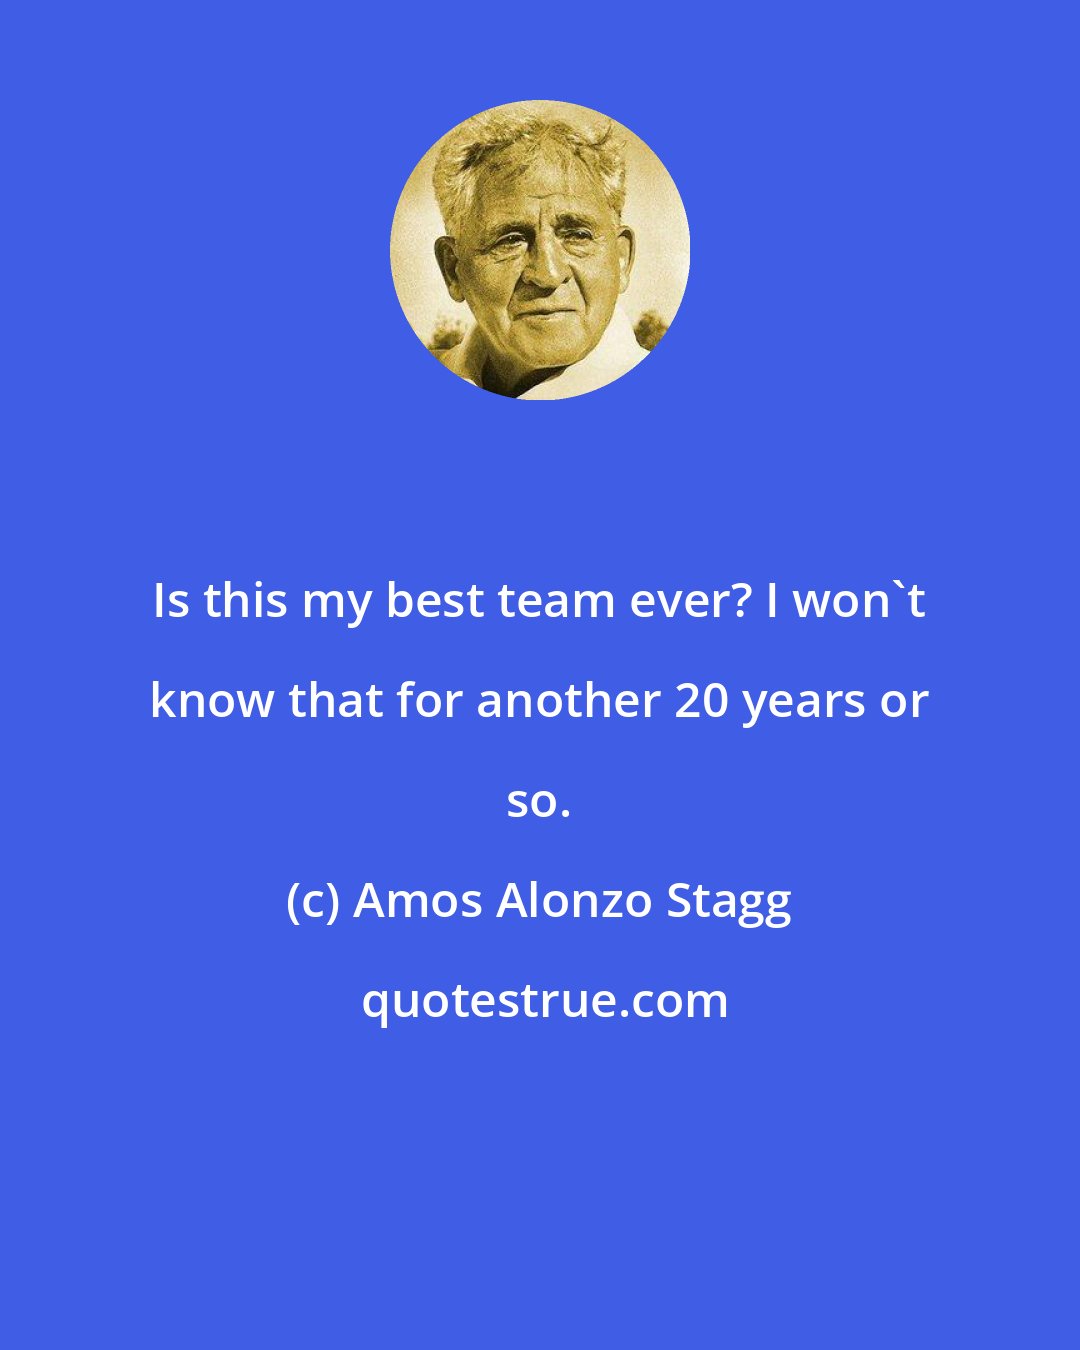 Amos Alonzo Stagg: Is this my best team ever? I won't know that for another 20 years or so.